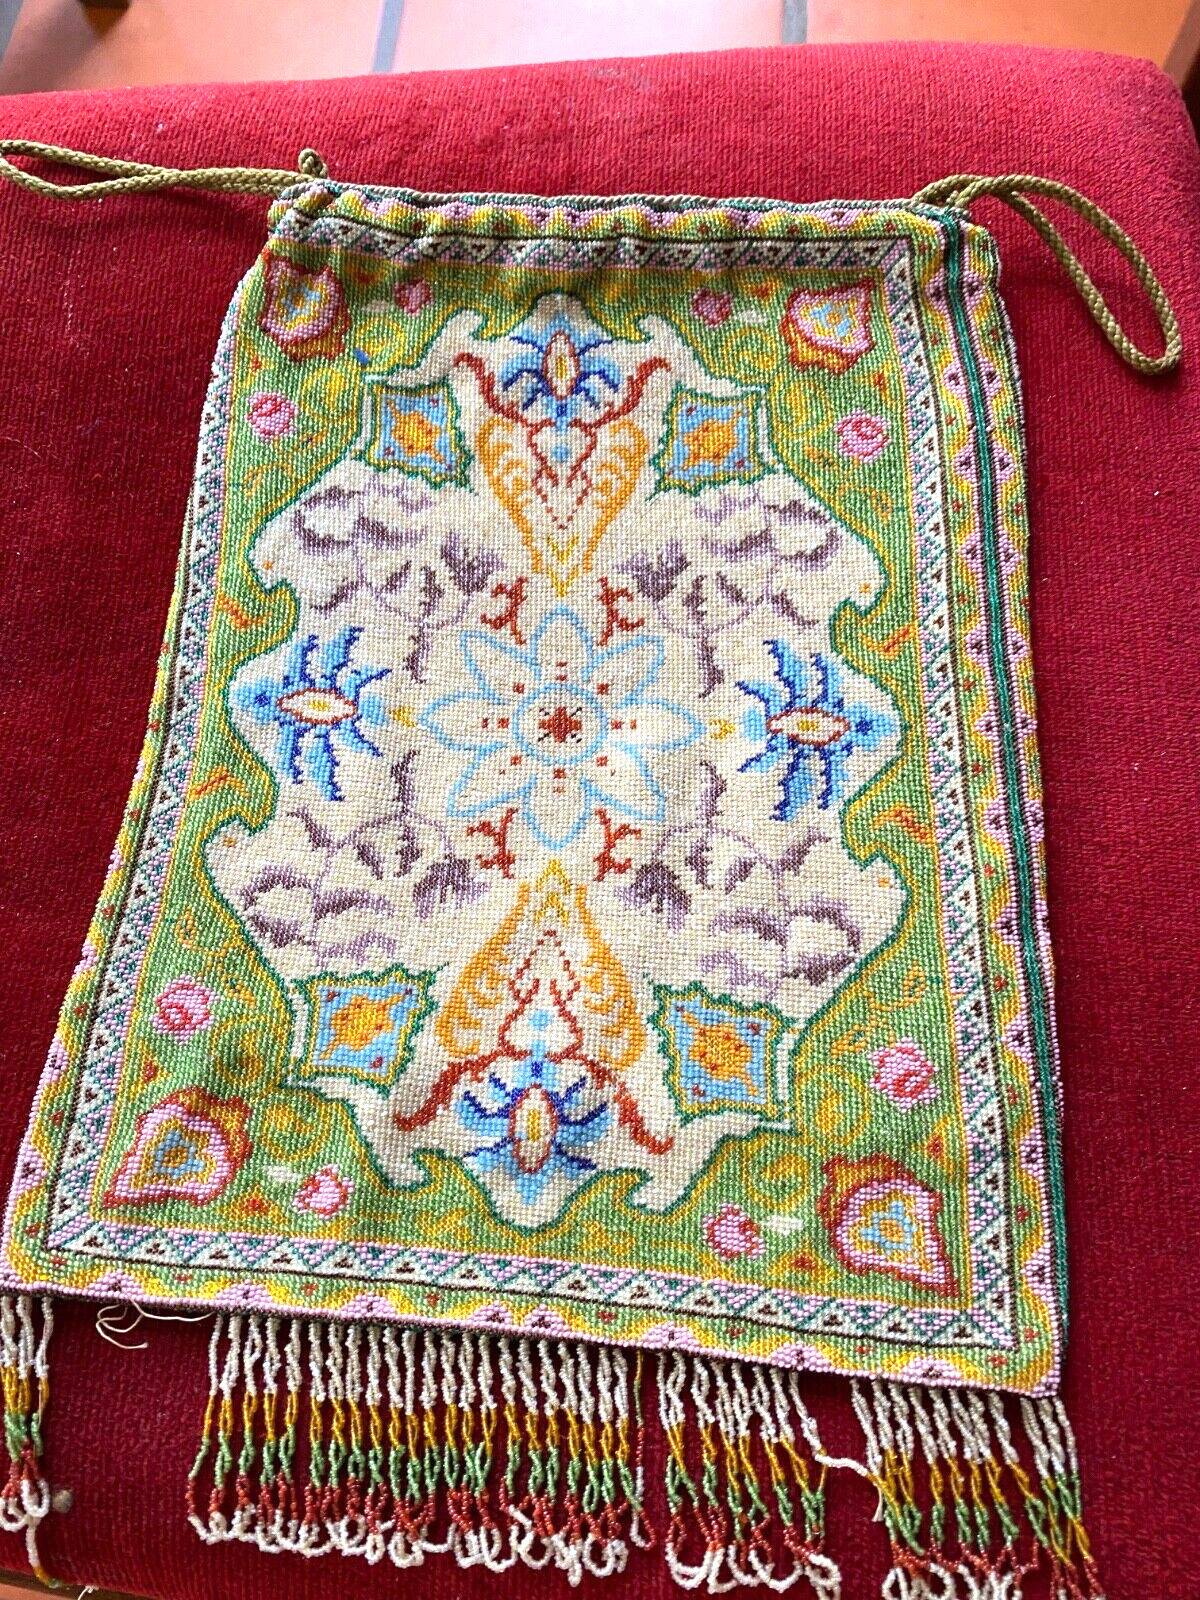 Antique Beaded Purse Tiny Beads 10 to the cm  Same Design Both Sides